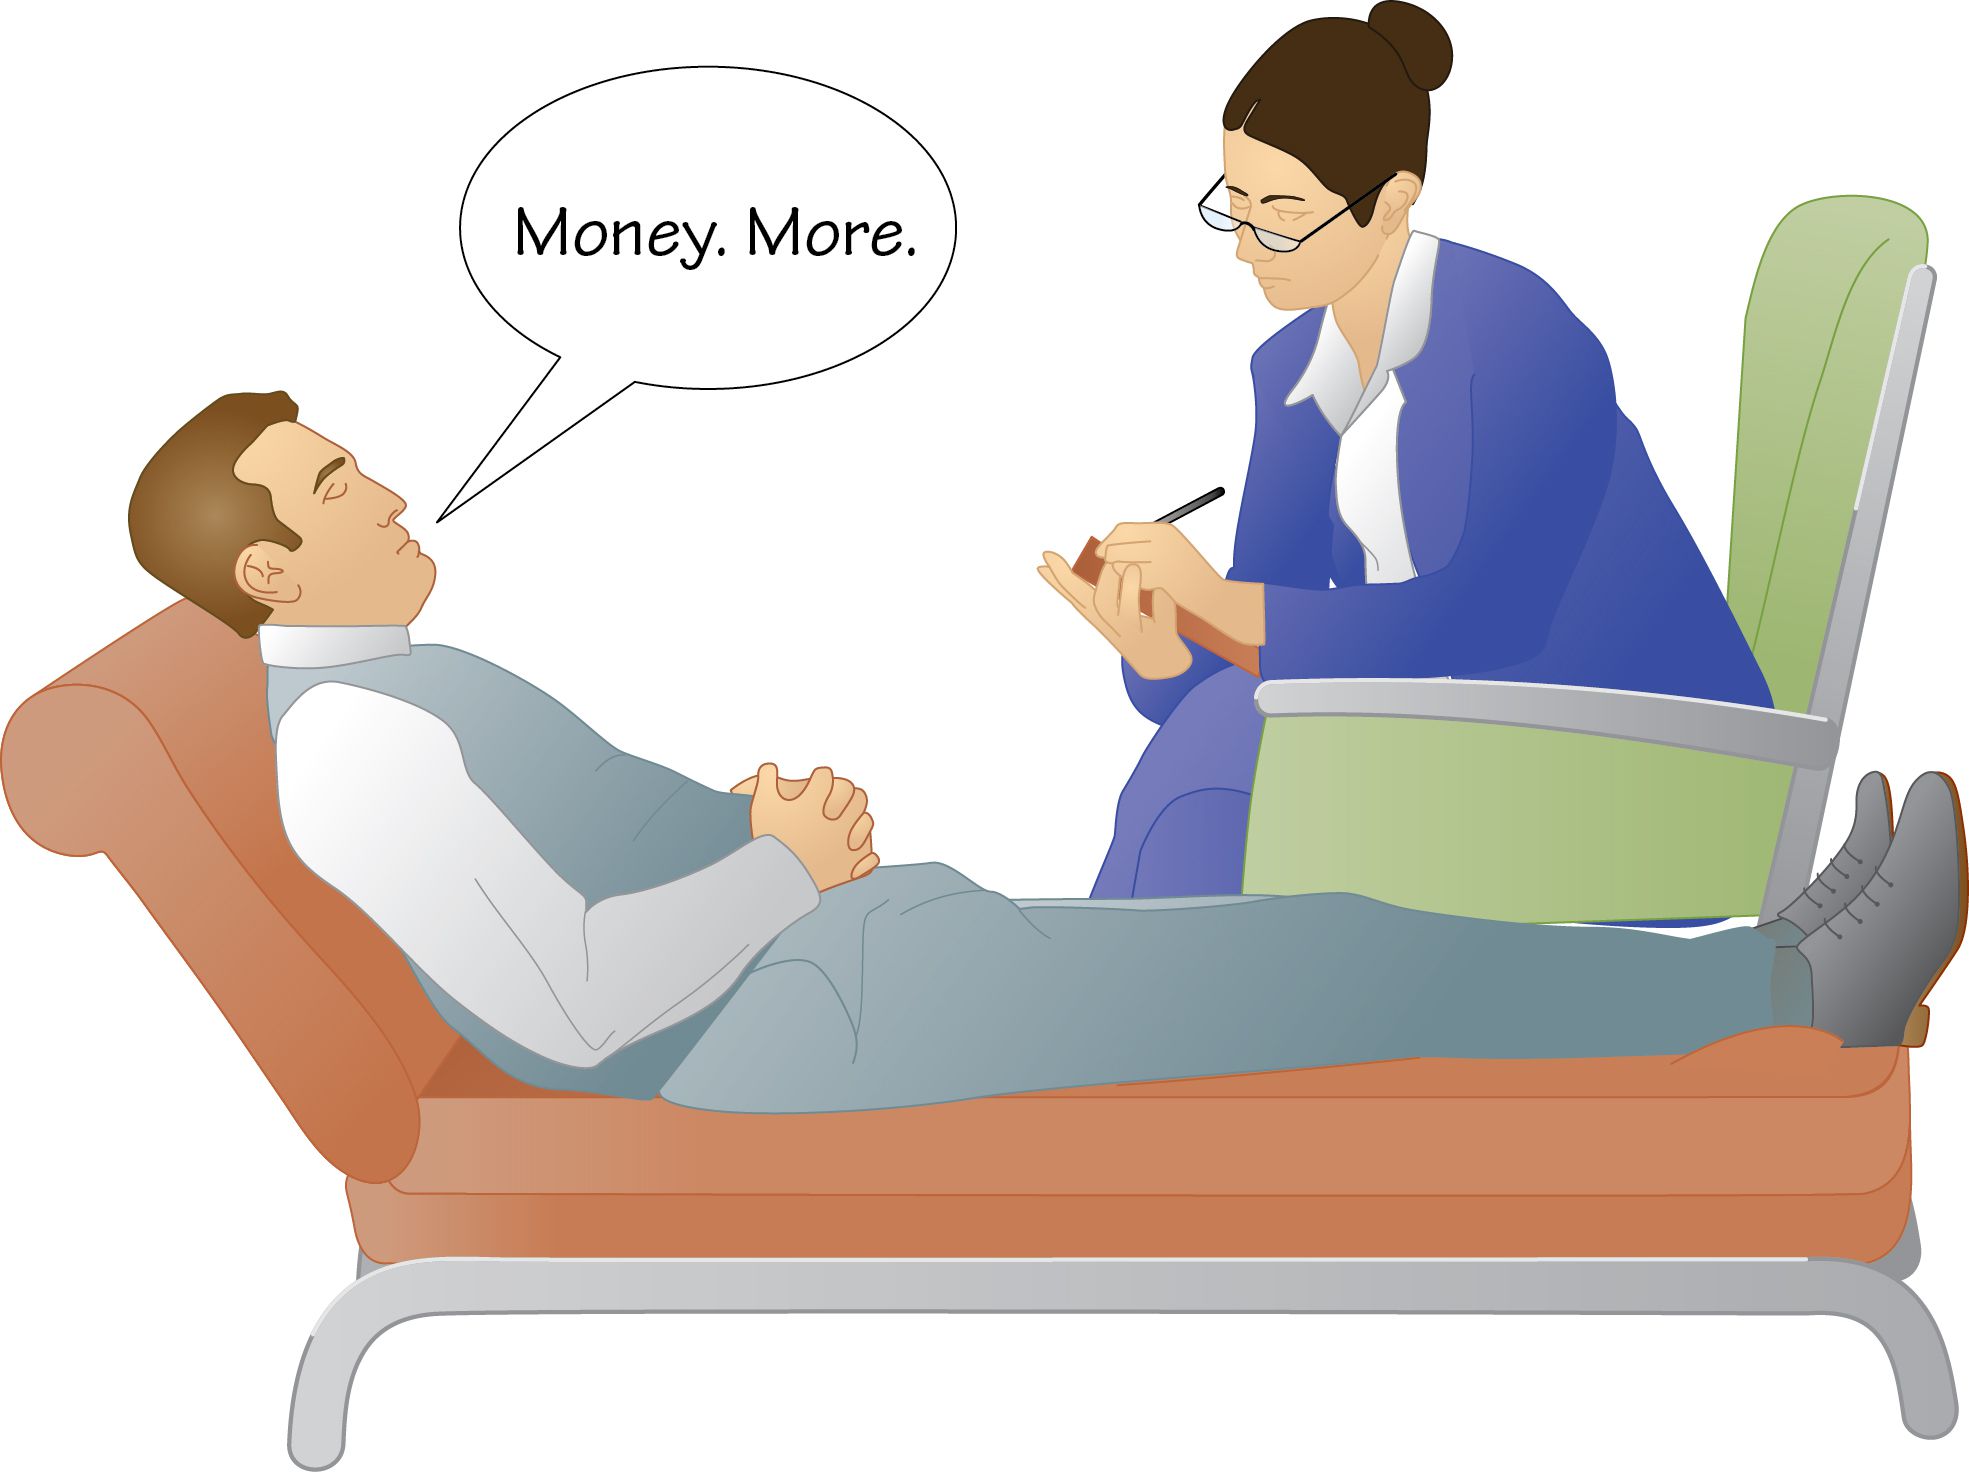 female psychoanalyst in chair, listening and holding notes; male patient lying on a couch; speech bubble over patient’s head shows the text “Money. More.”